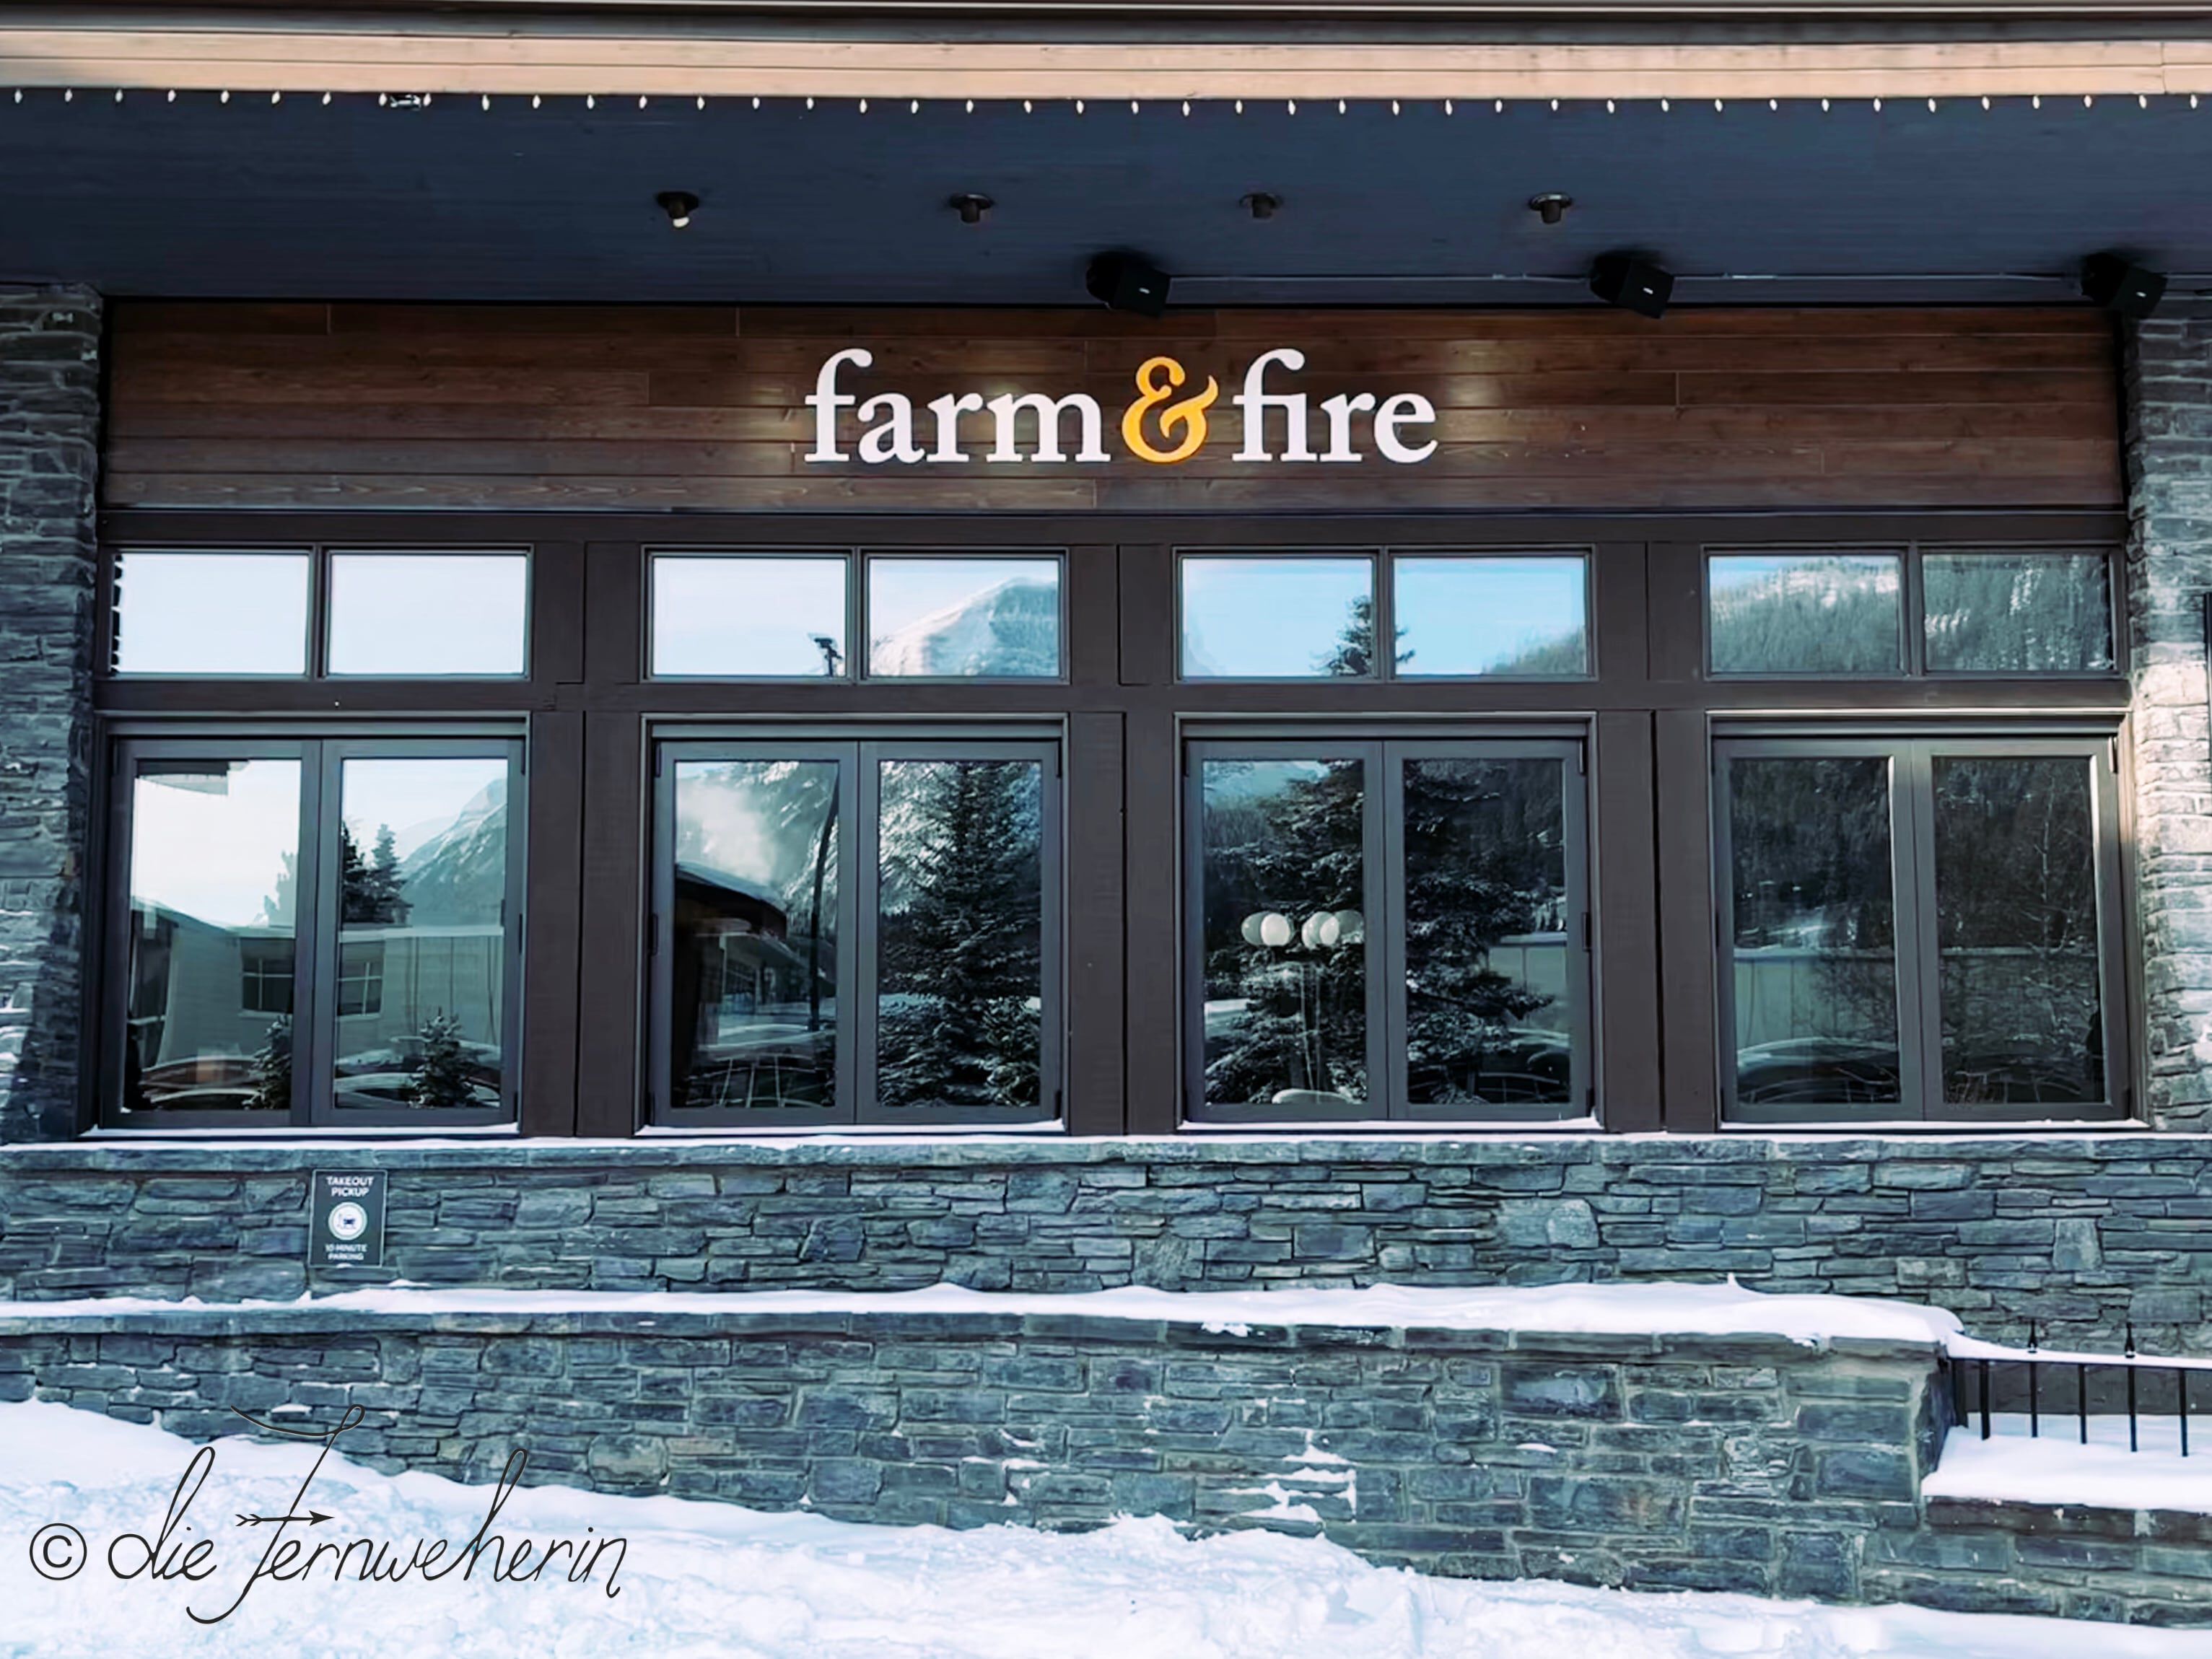 Exterior view of Farm & Fire, a restaurant in the town of Banff.